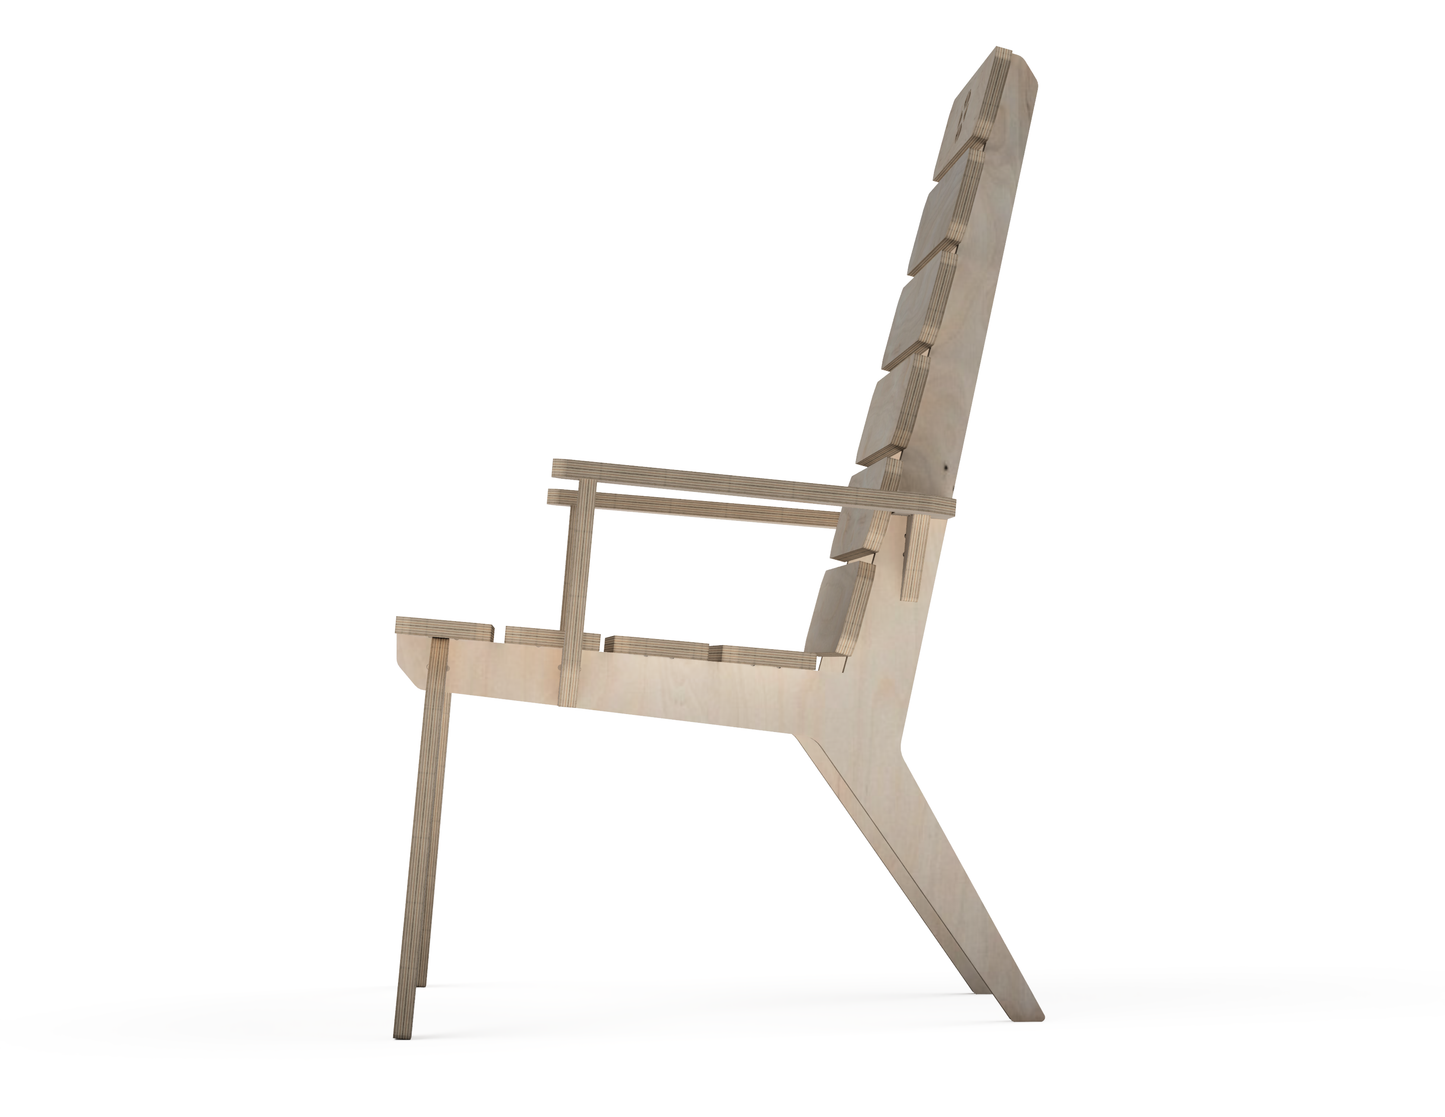 Lounge chair (with armrest) DXF file